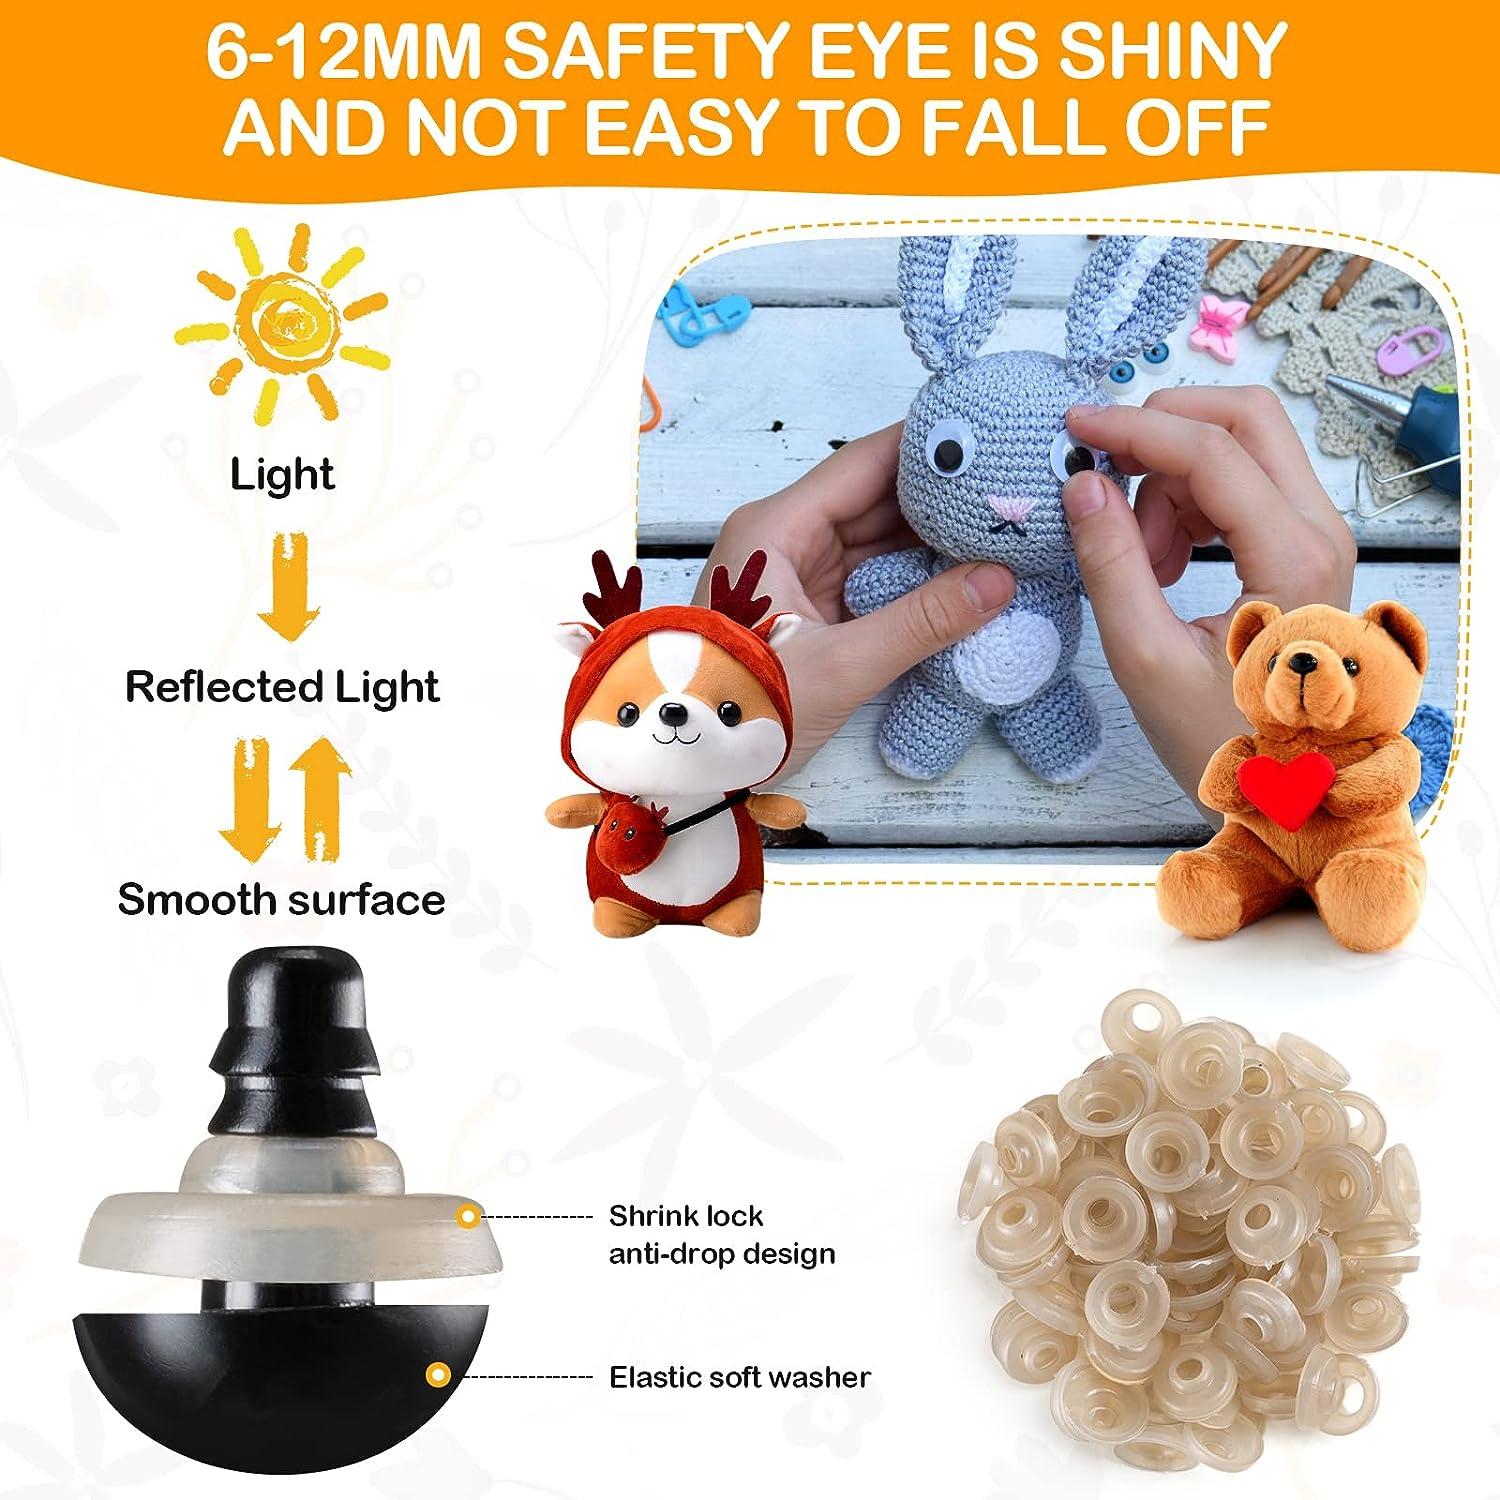 Safety Eyes and Safety Noses for Amigurumi and Soft Toy Making